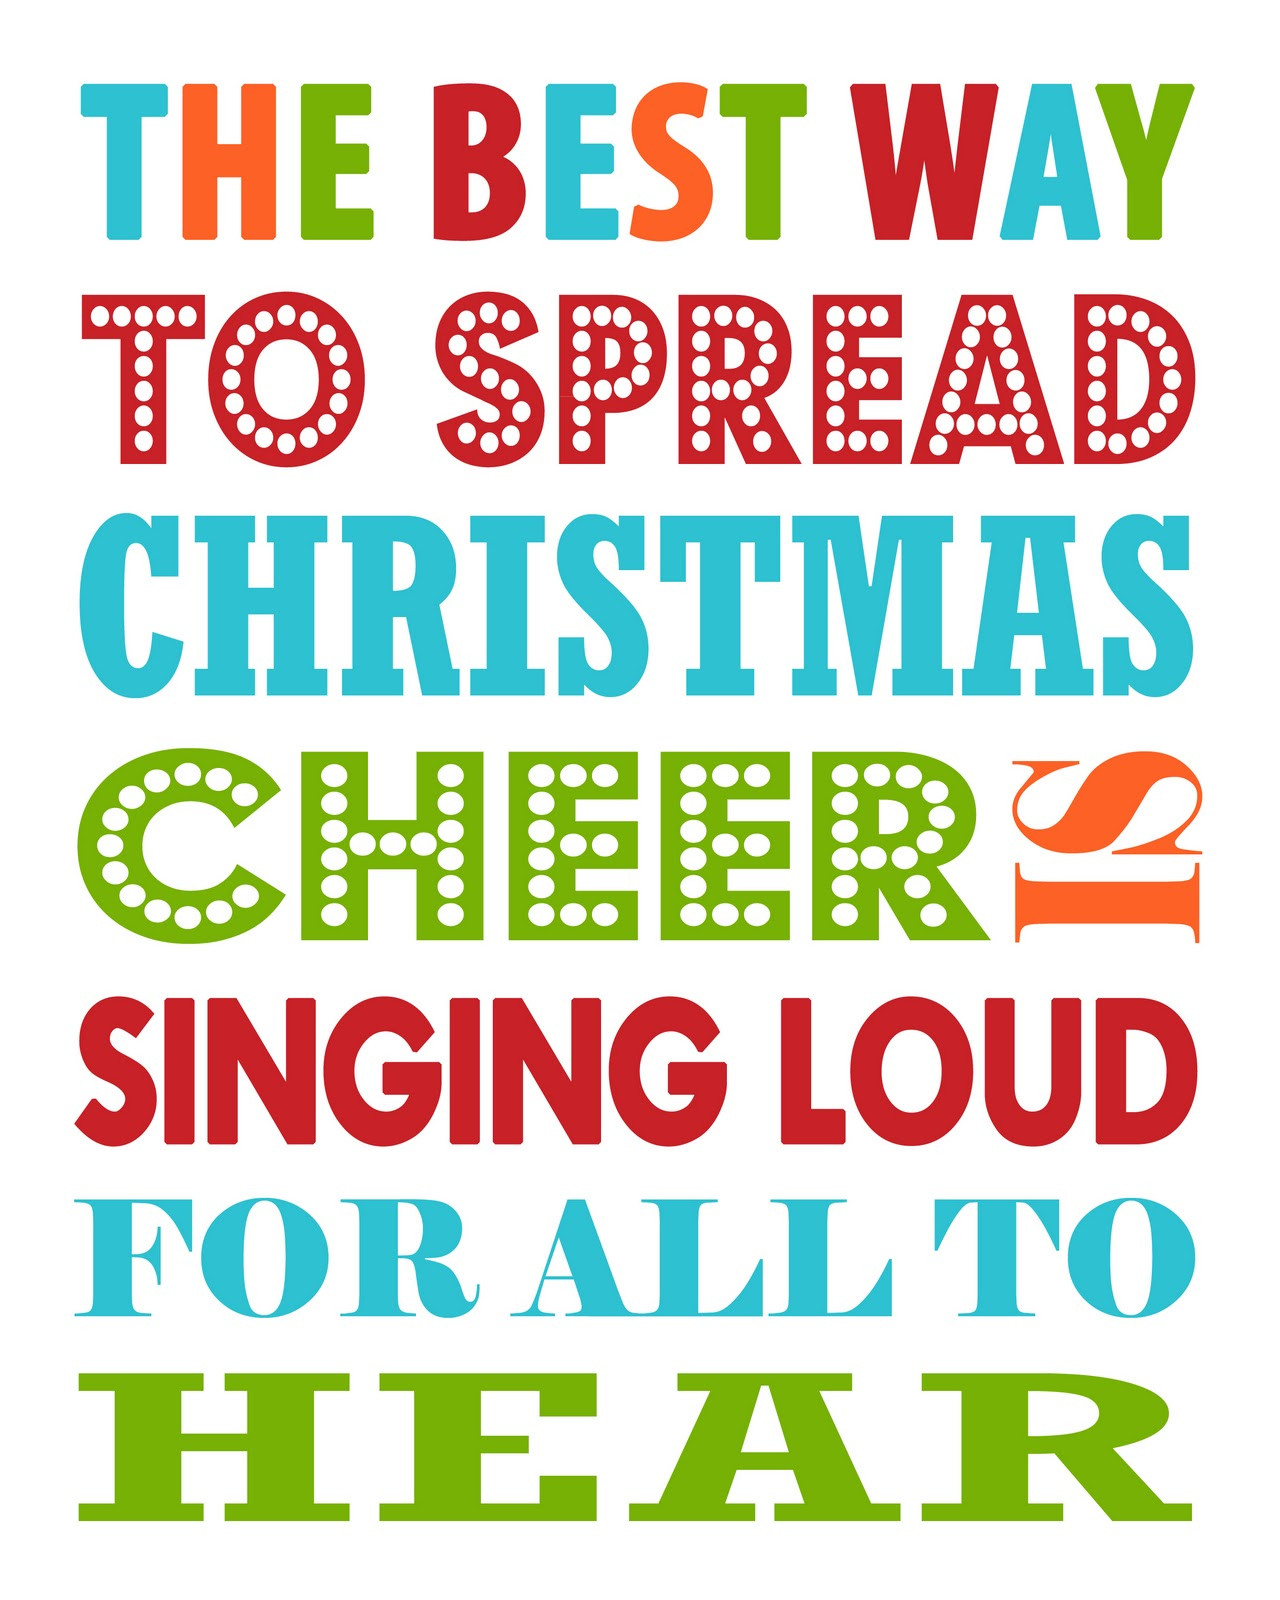 Elf Quotes Christmas Cheer
 Free Christmas Printable The Best way to spread